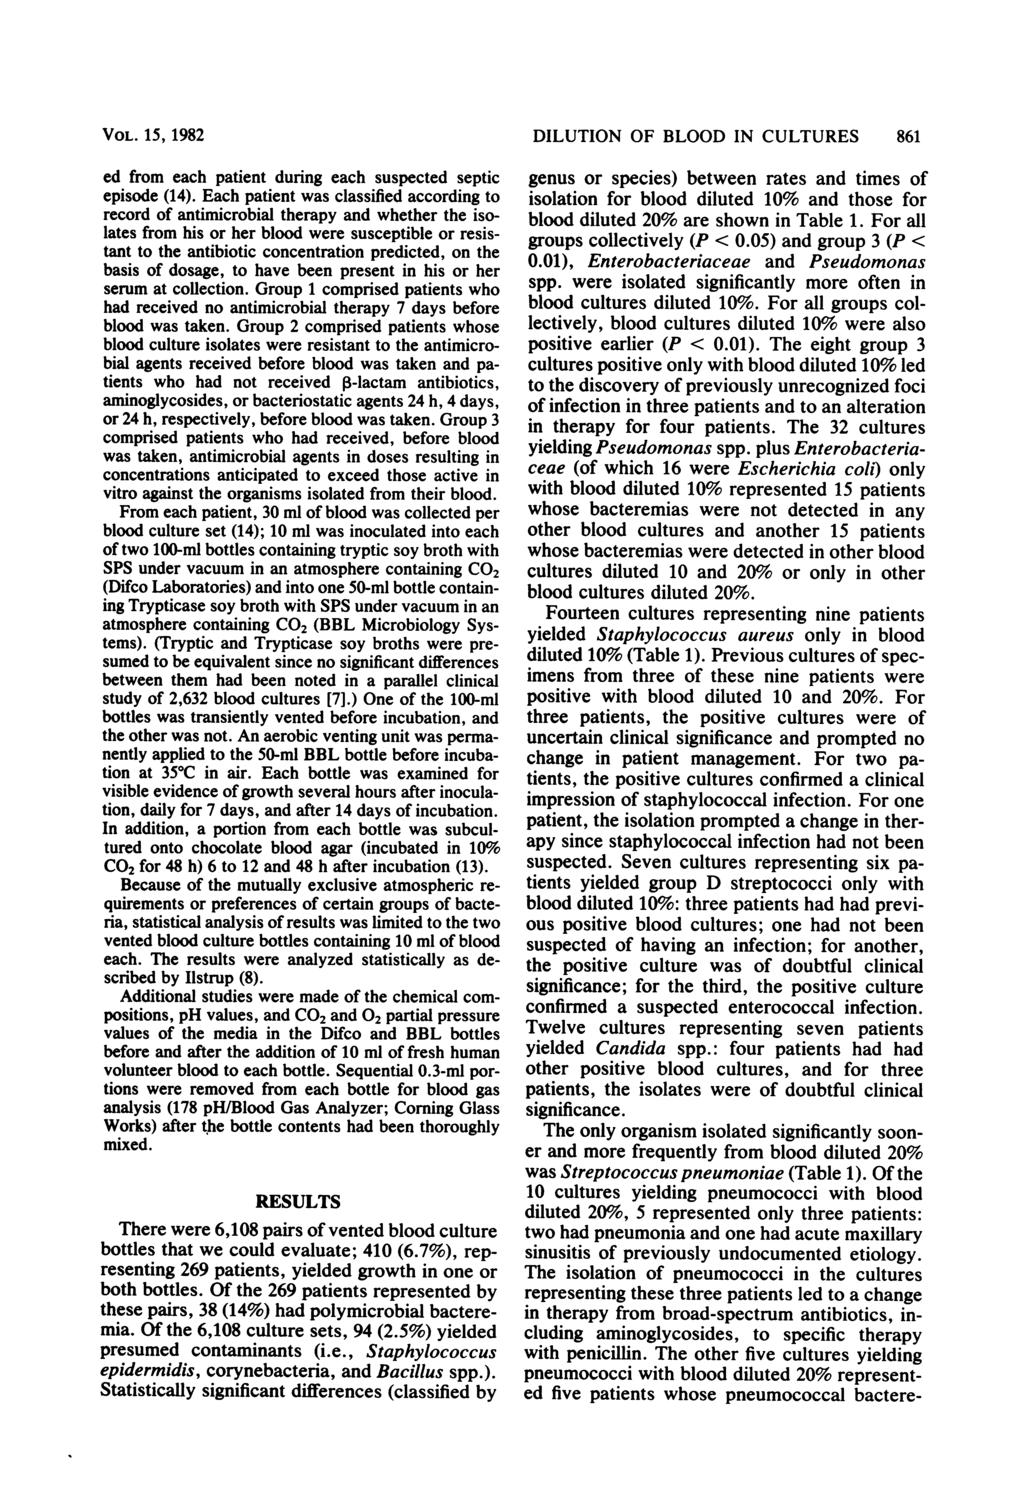 VOL. 15, 1982 ed from each patient during each suspected septic episode (14).